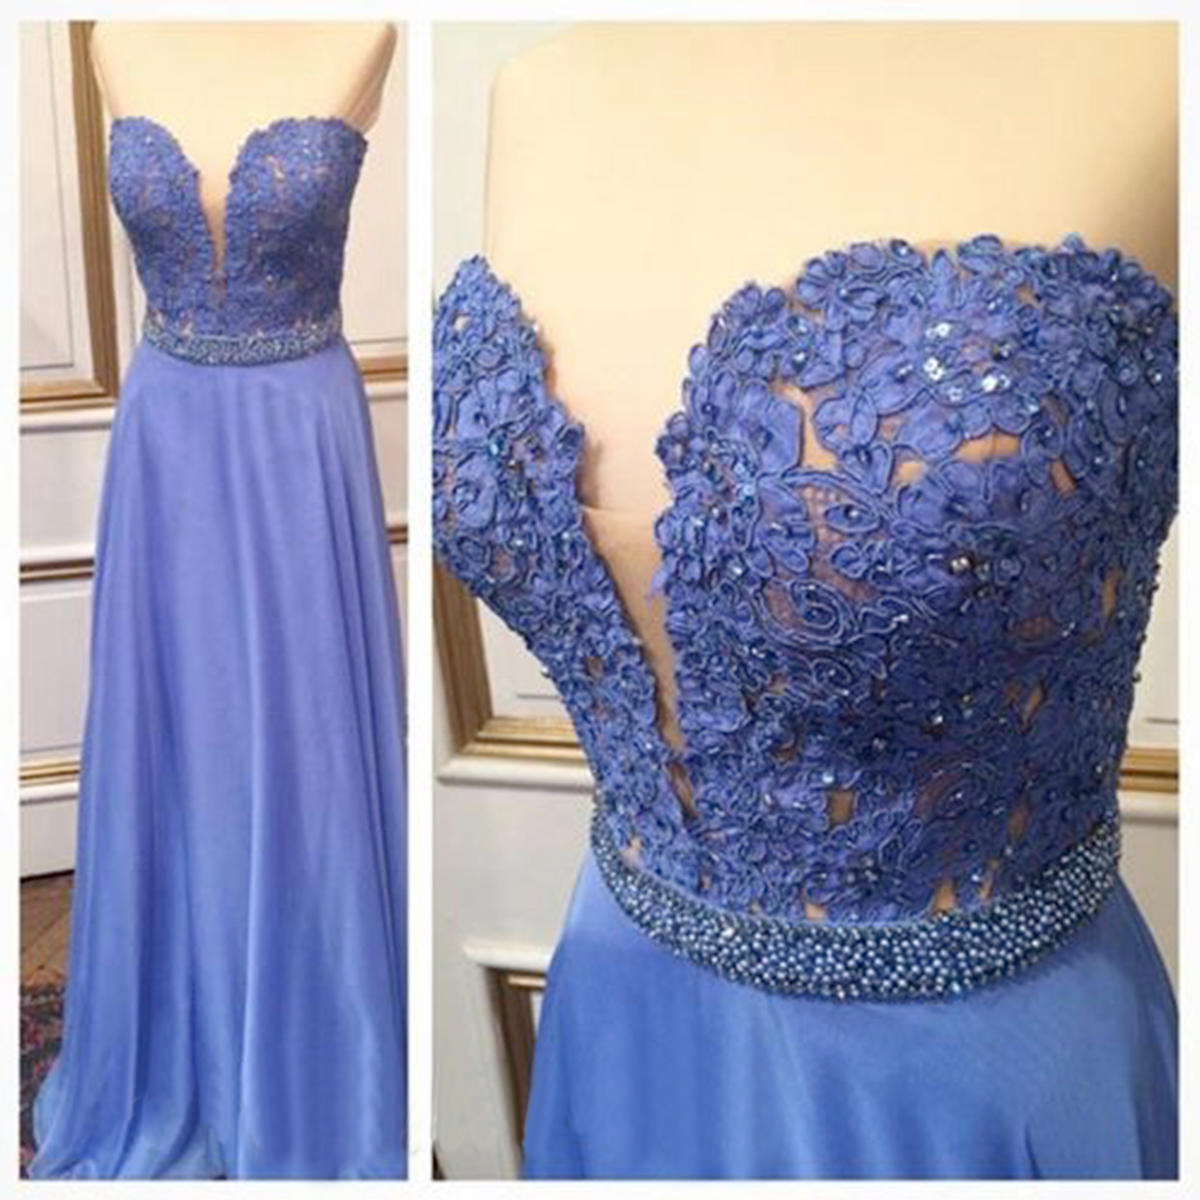 Custom Made High Quality A-line Prom Dress,charming Prom Gowns,chiffon Graduation Dress,sweetheart Evening Dress,beading Lace Evening Dress,noble